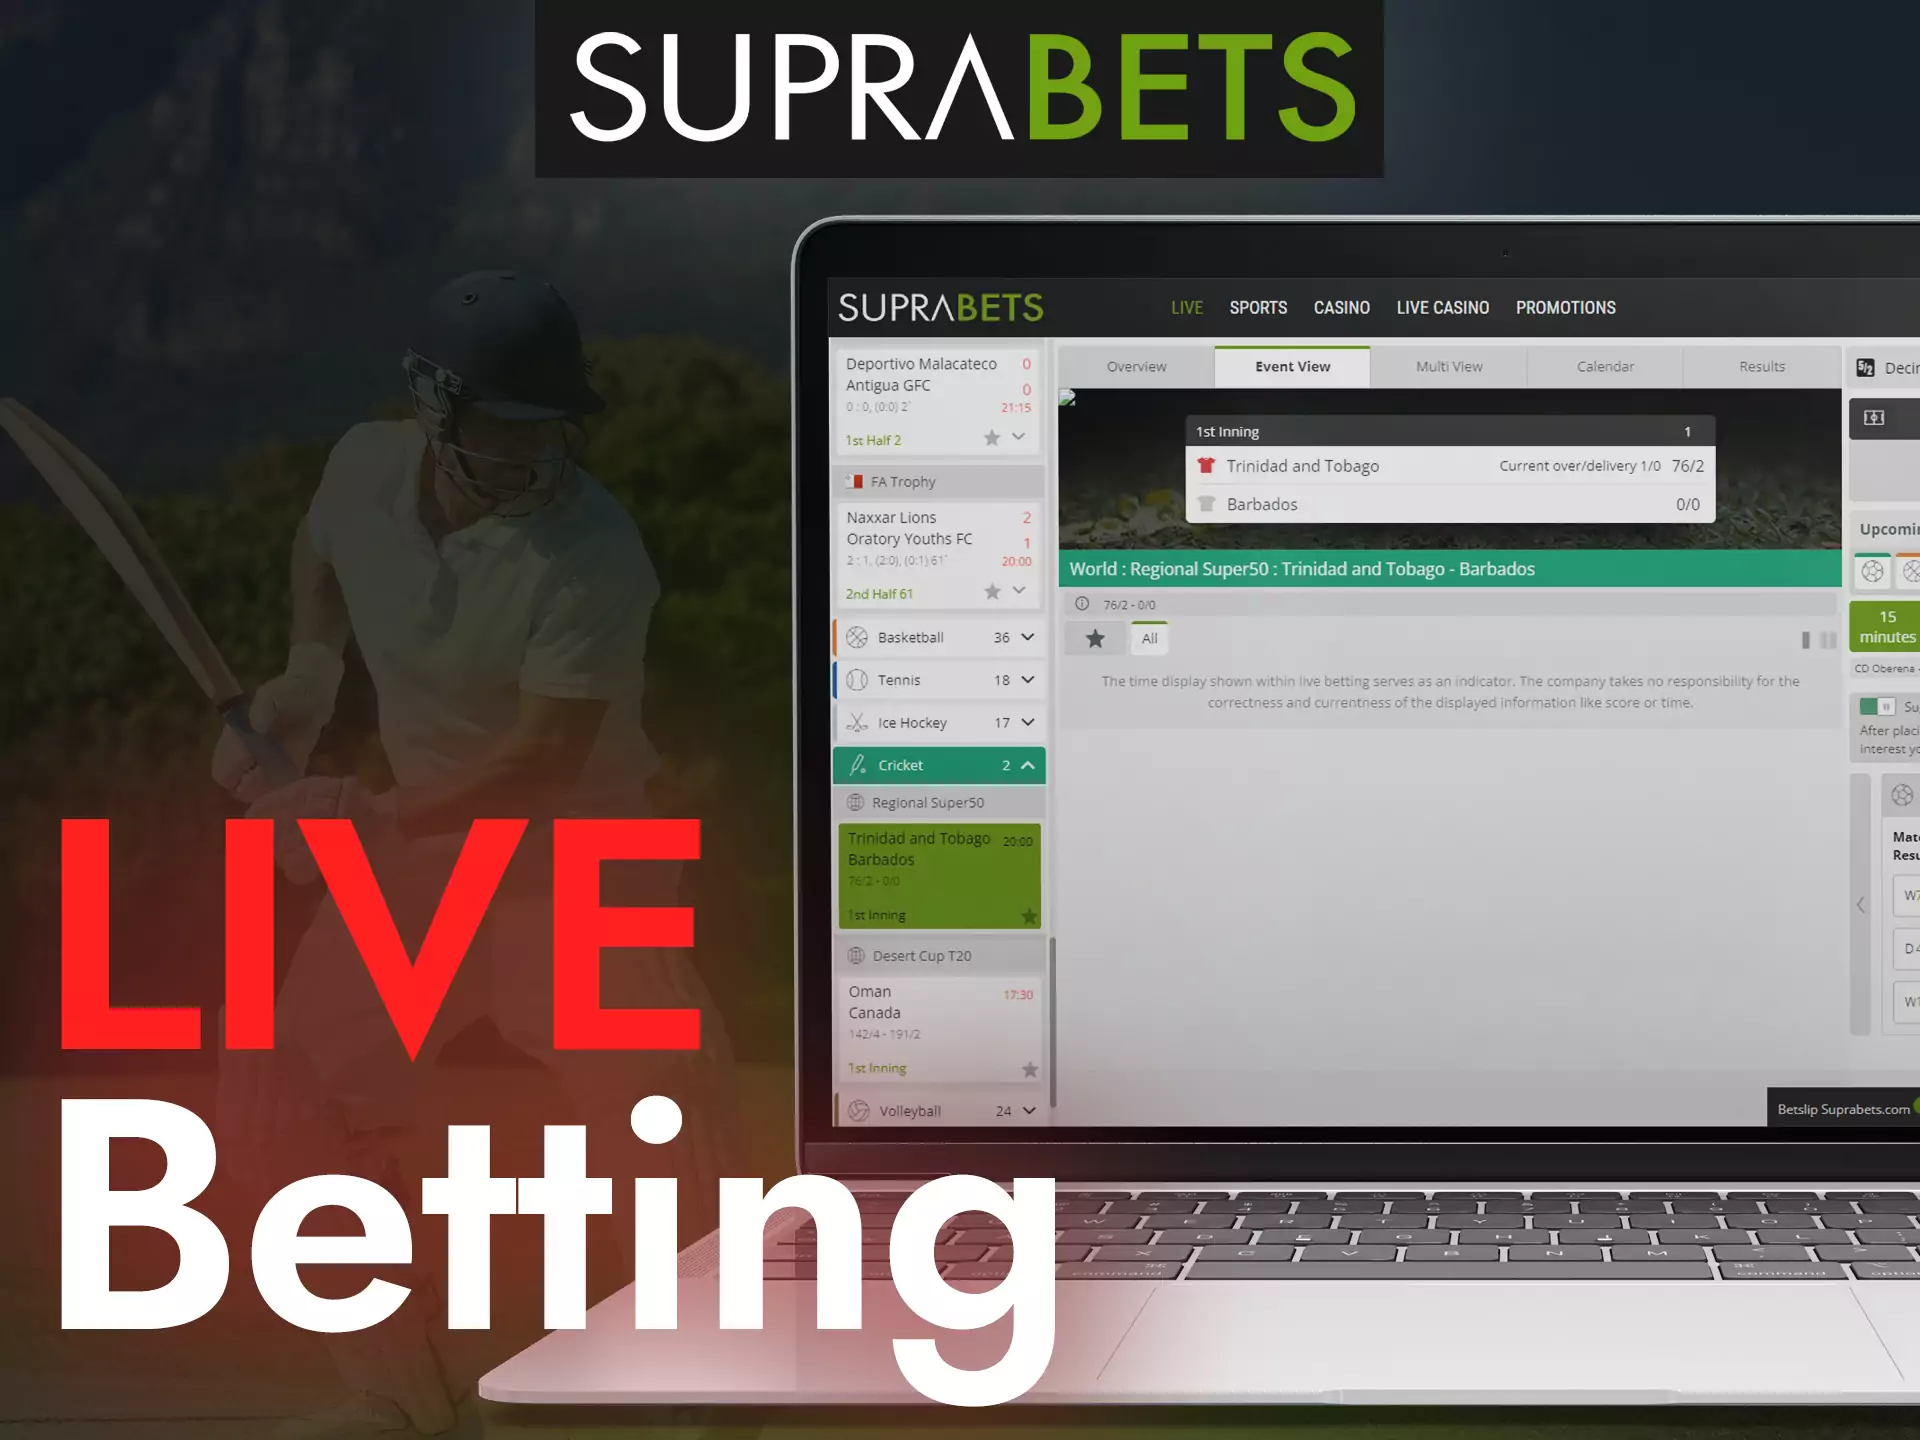 With Suprabets, place bets on sports events right during the game.